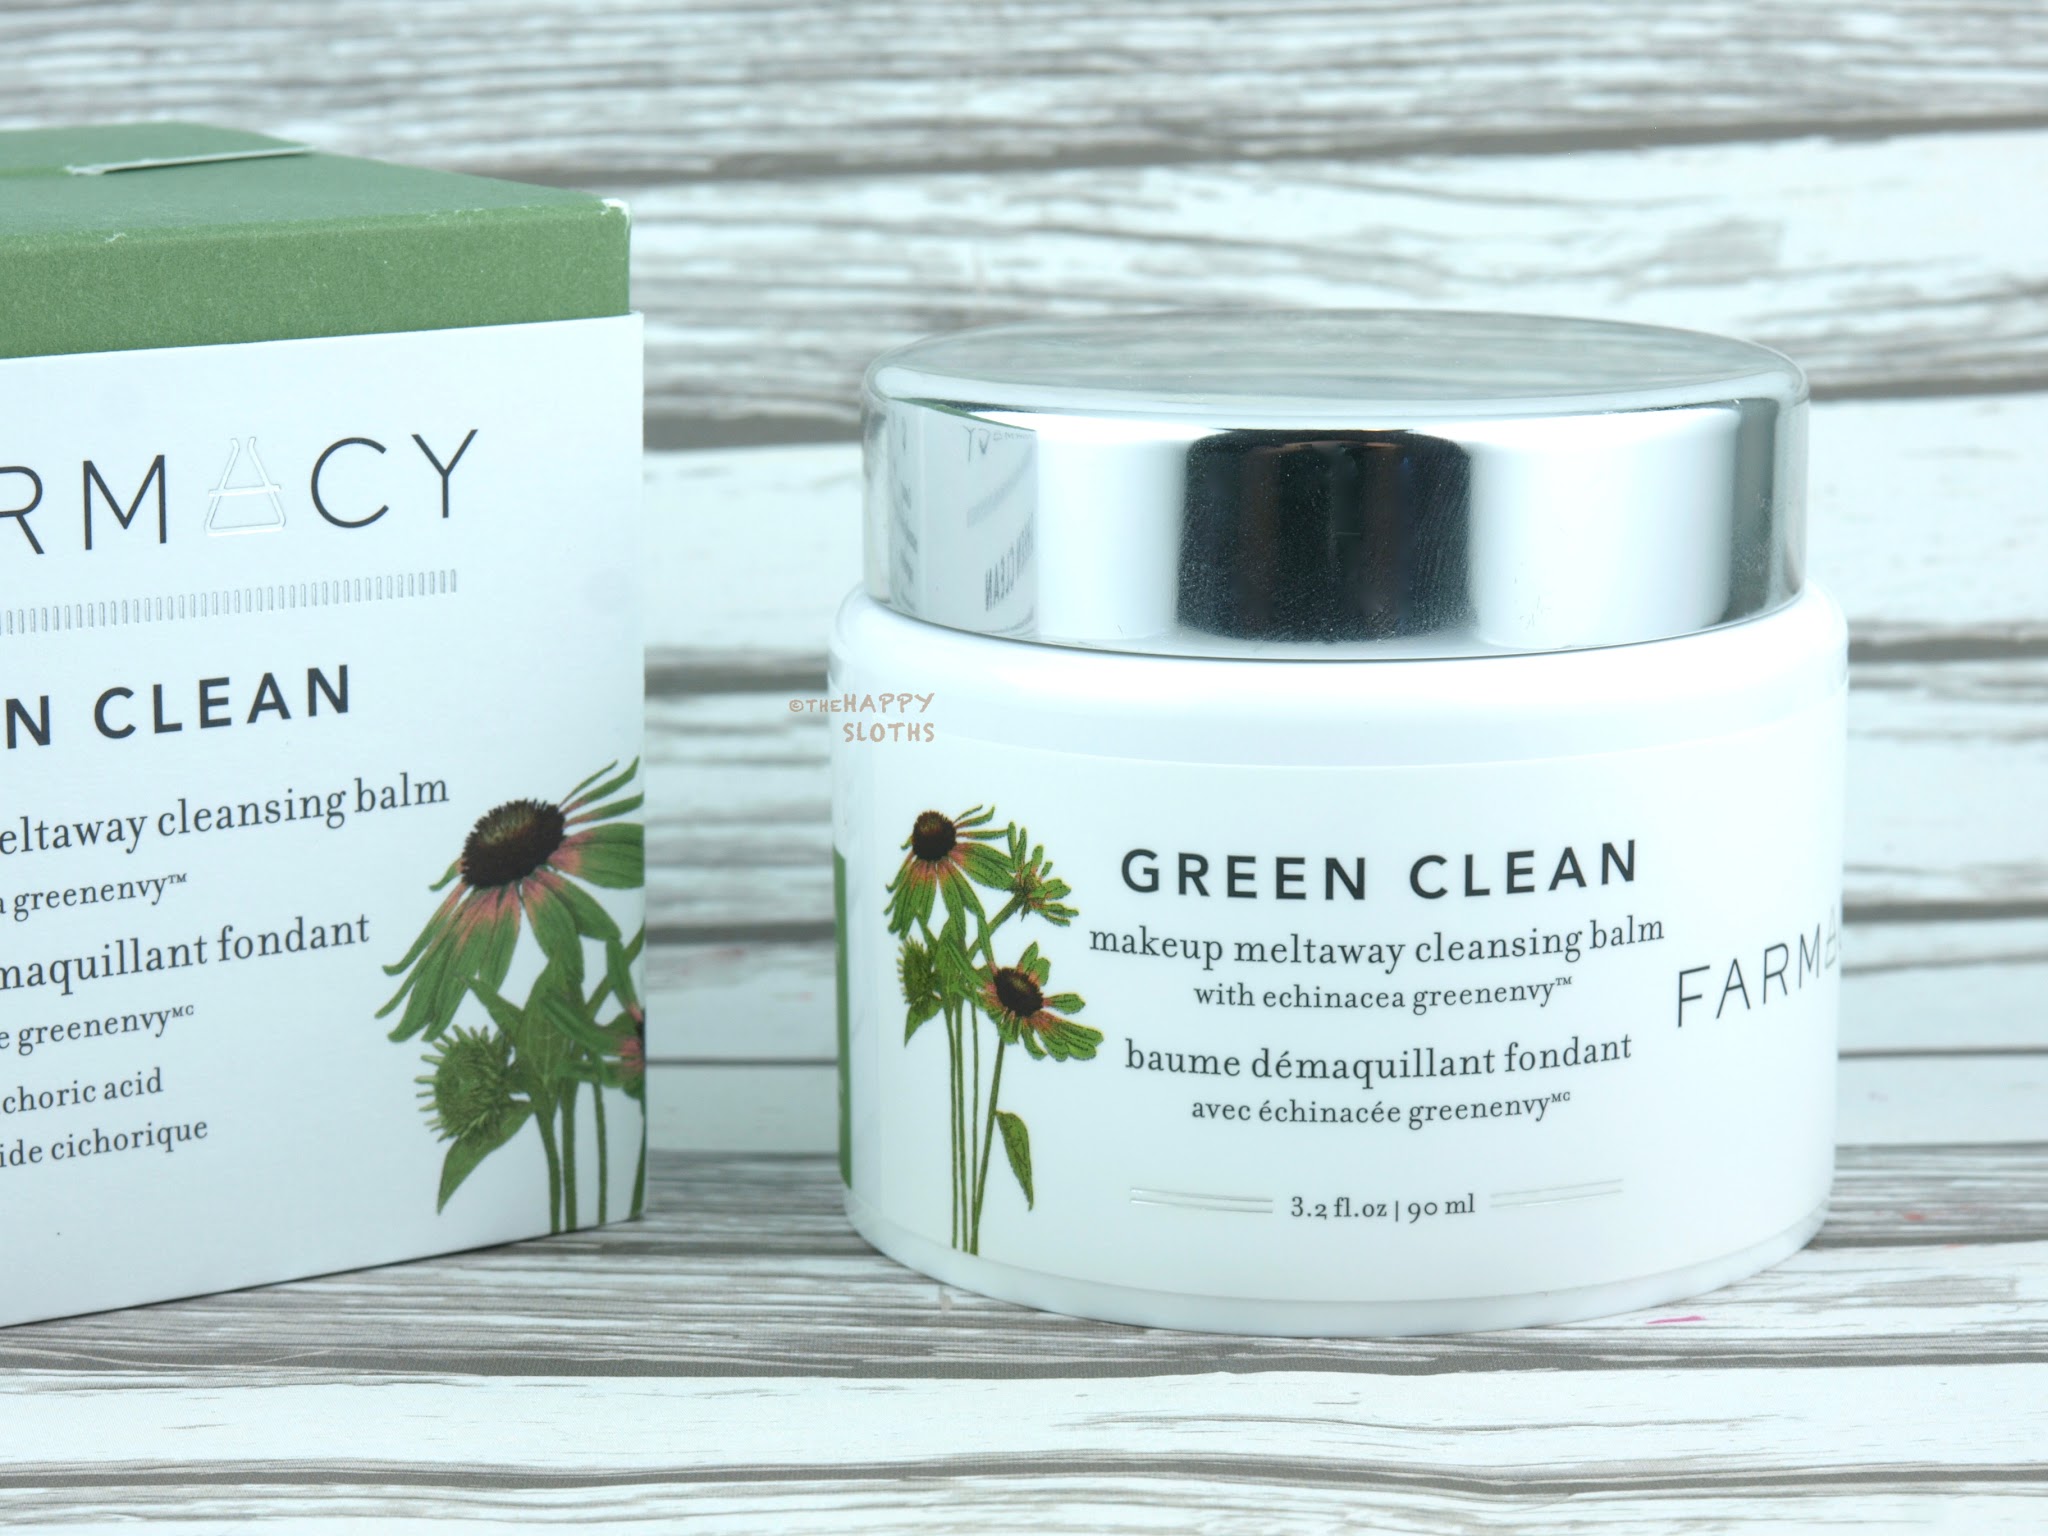 Farmacy Green Clean Makeup Meltaway Cleansing Balm: Review